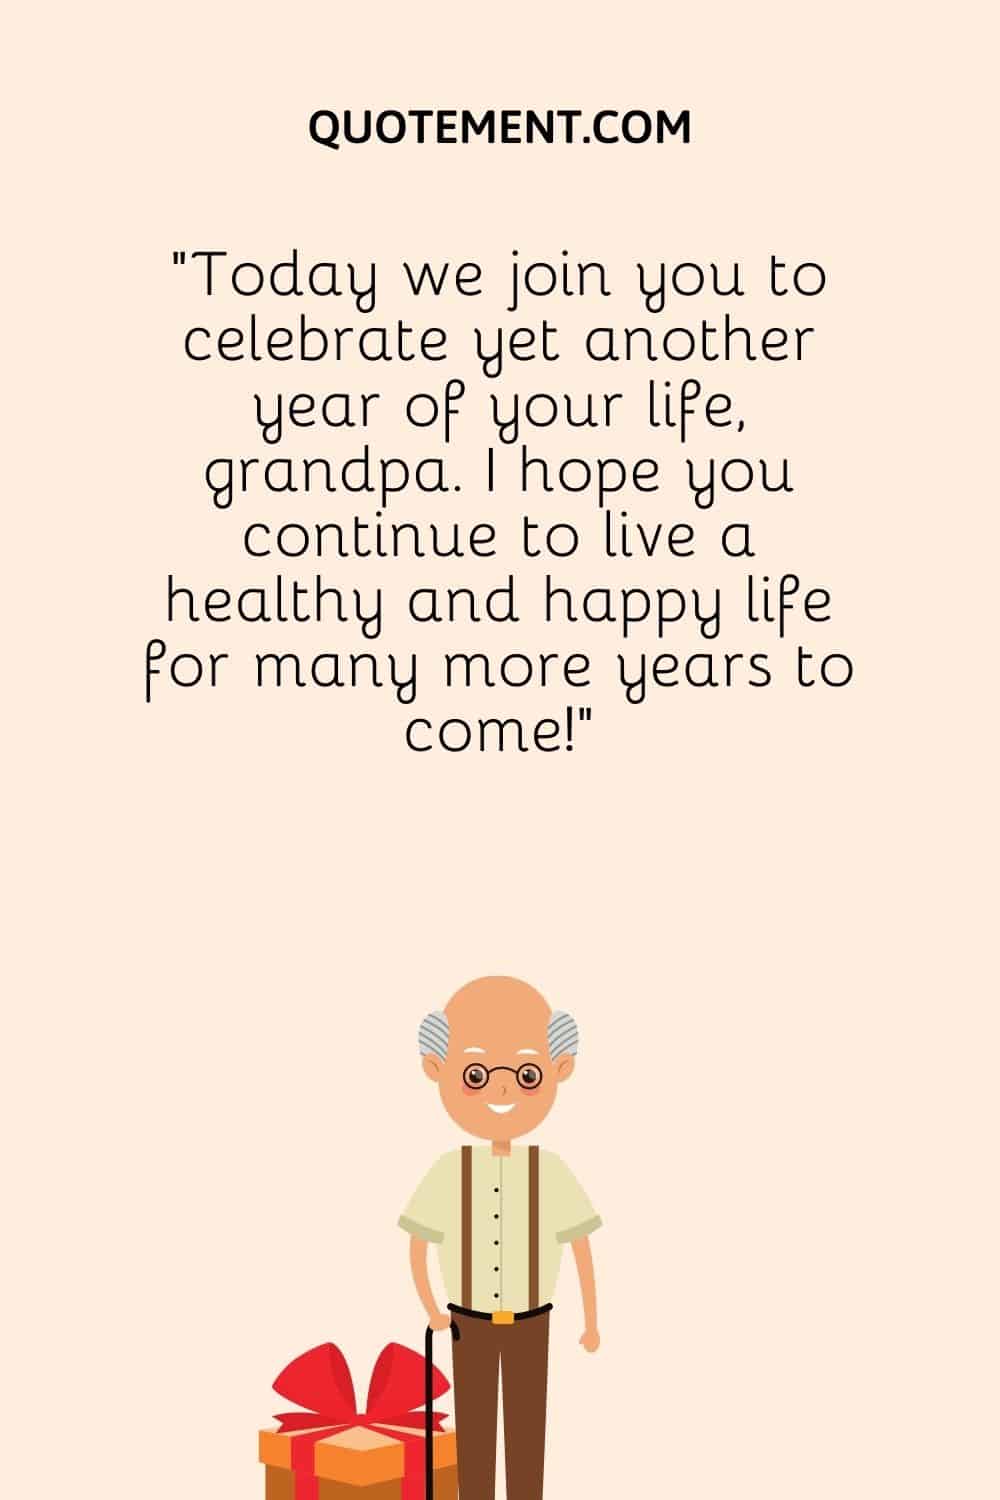 Today we join you to celebrate yet another year of your life, grandpa